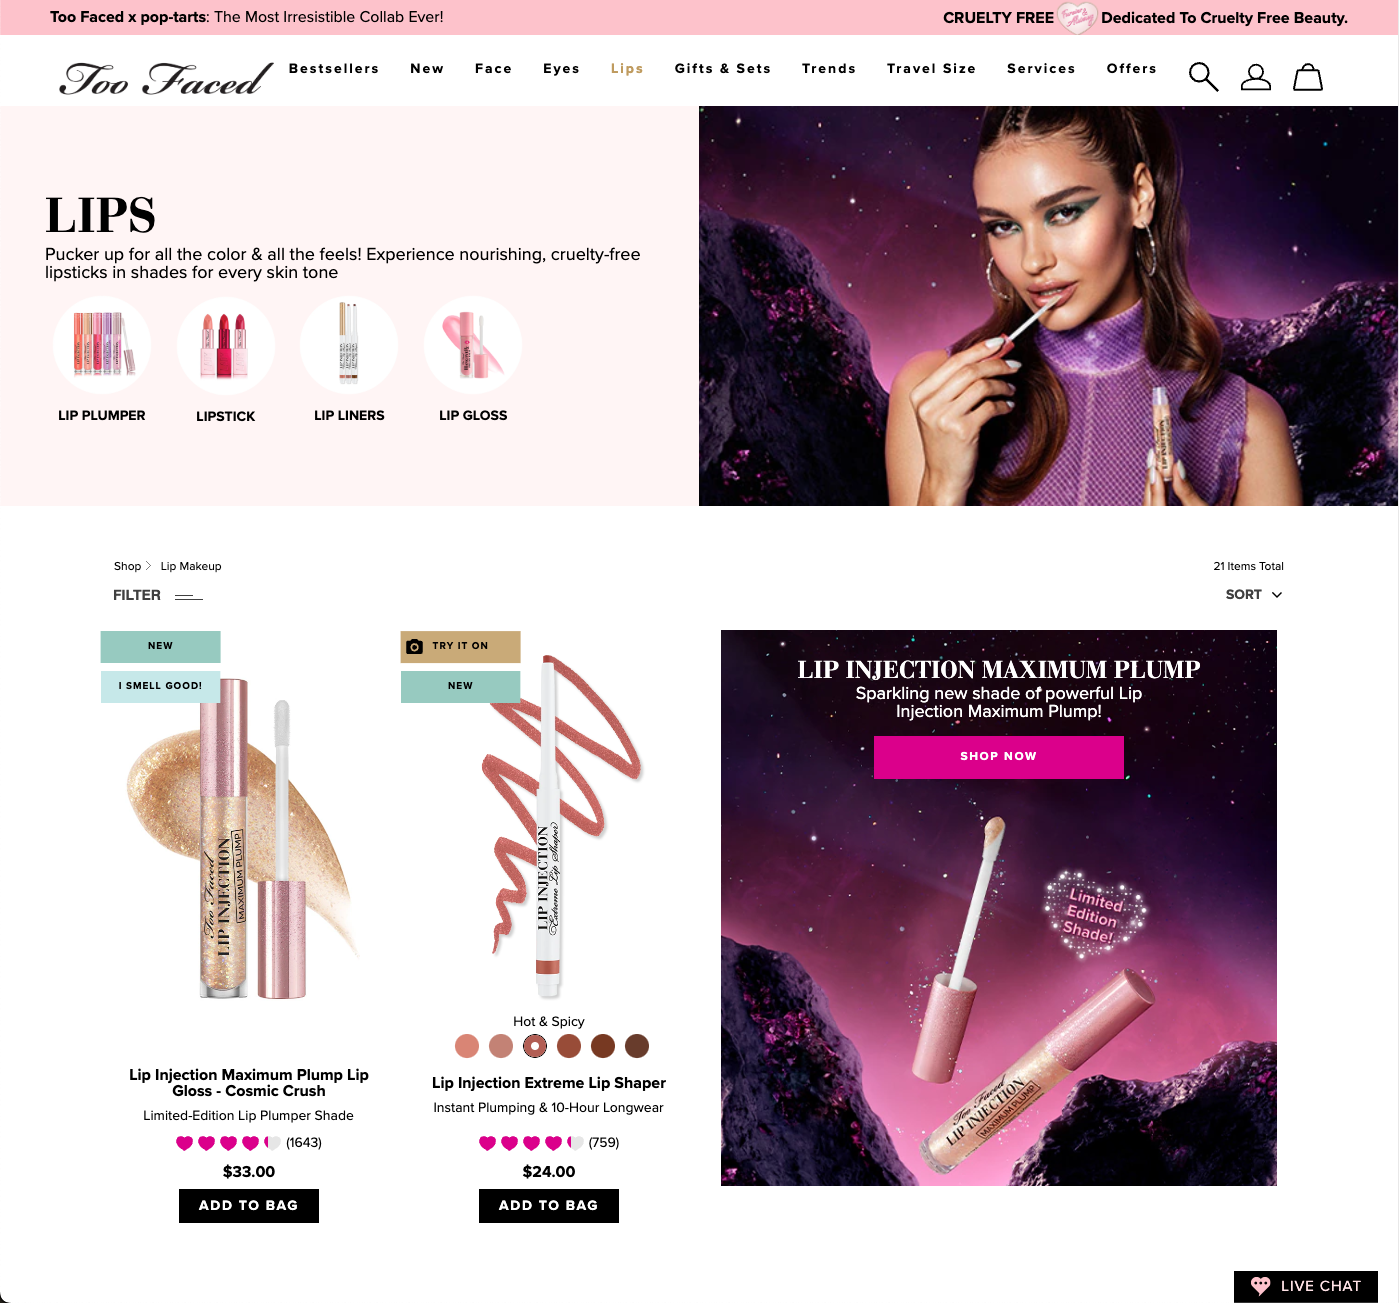 A screenshot of TooFaced.com on the Lips product page, with two lipstick products listed.